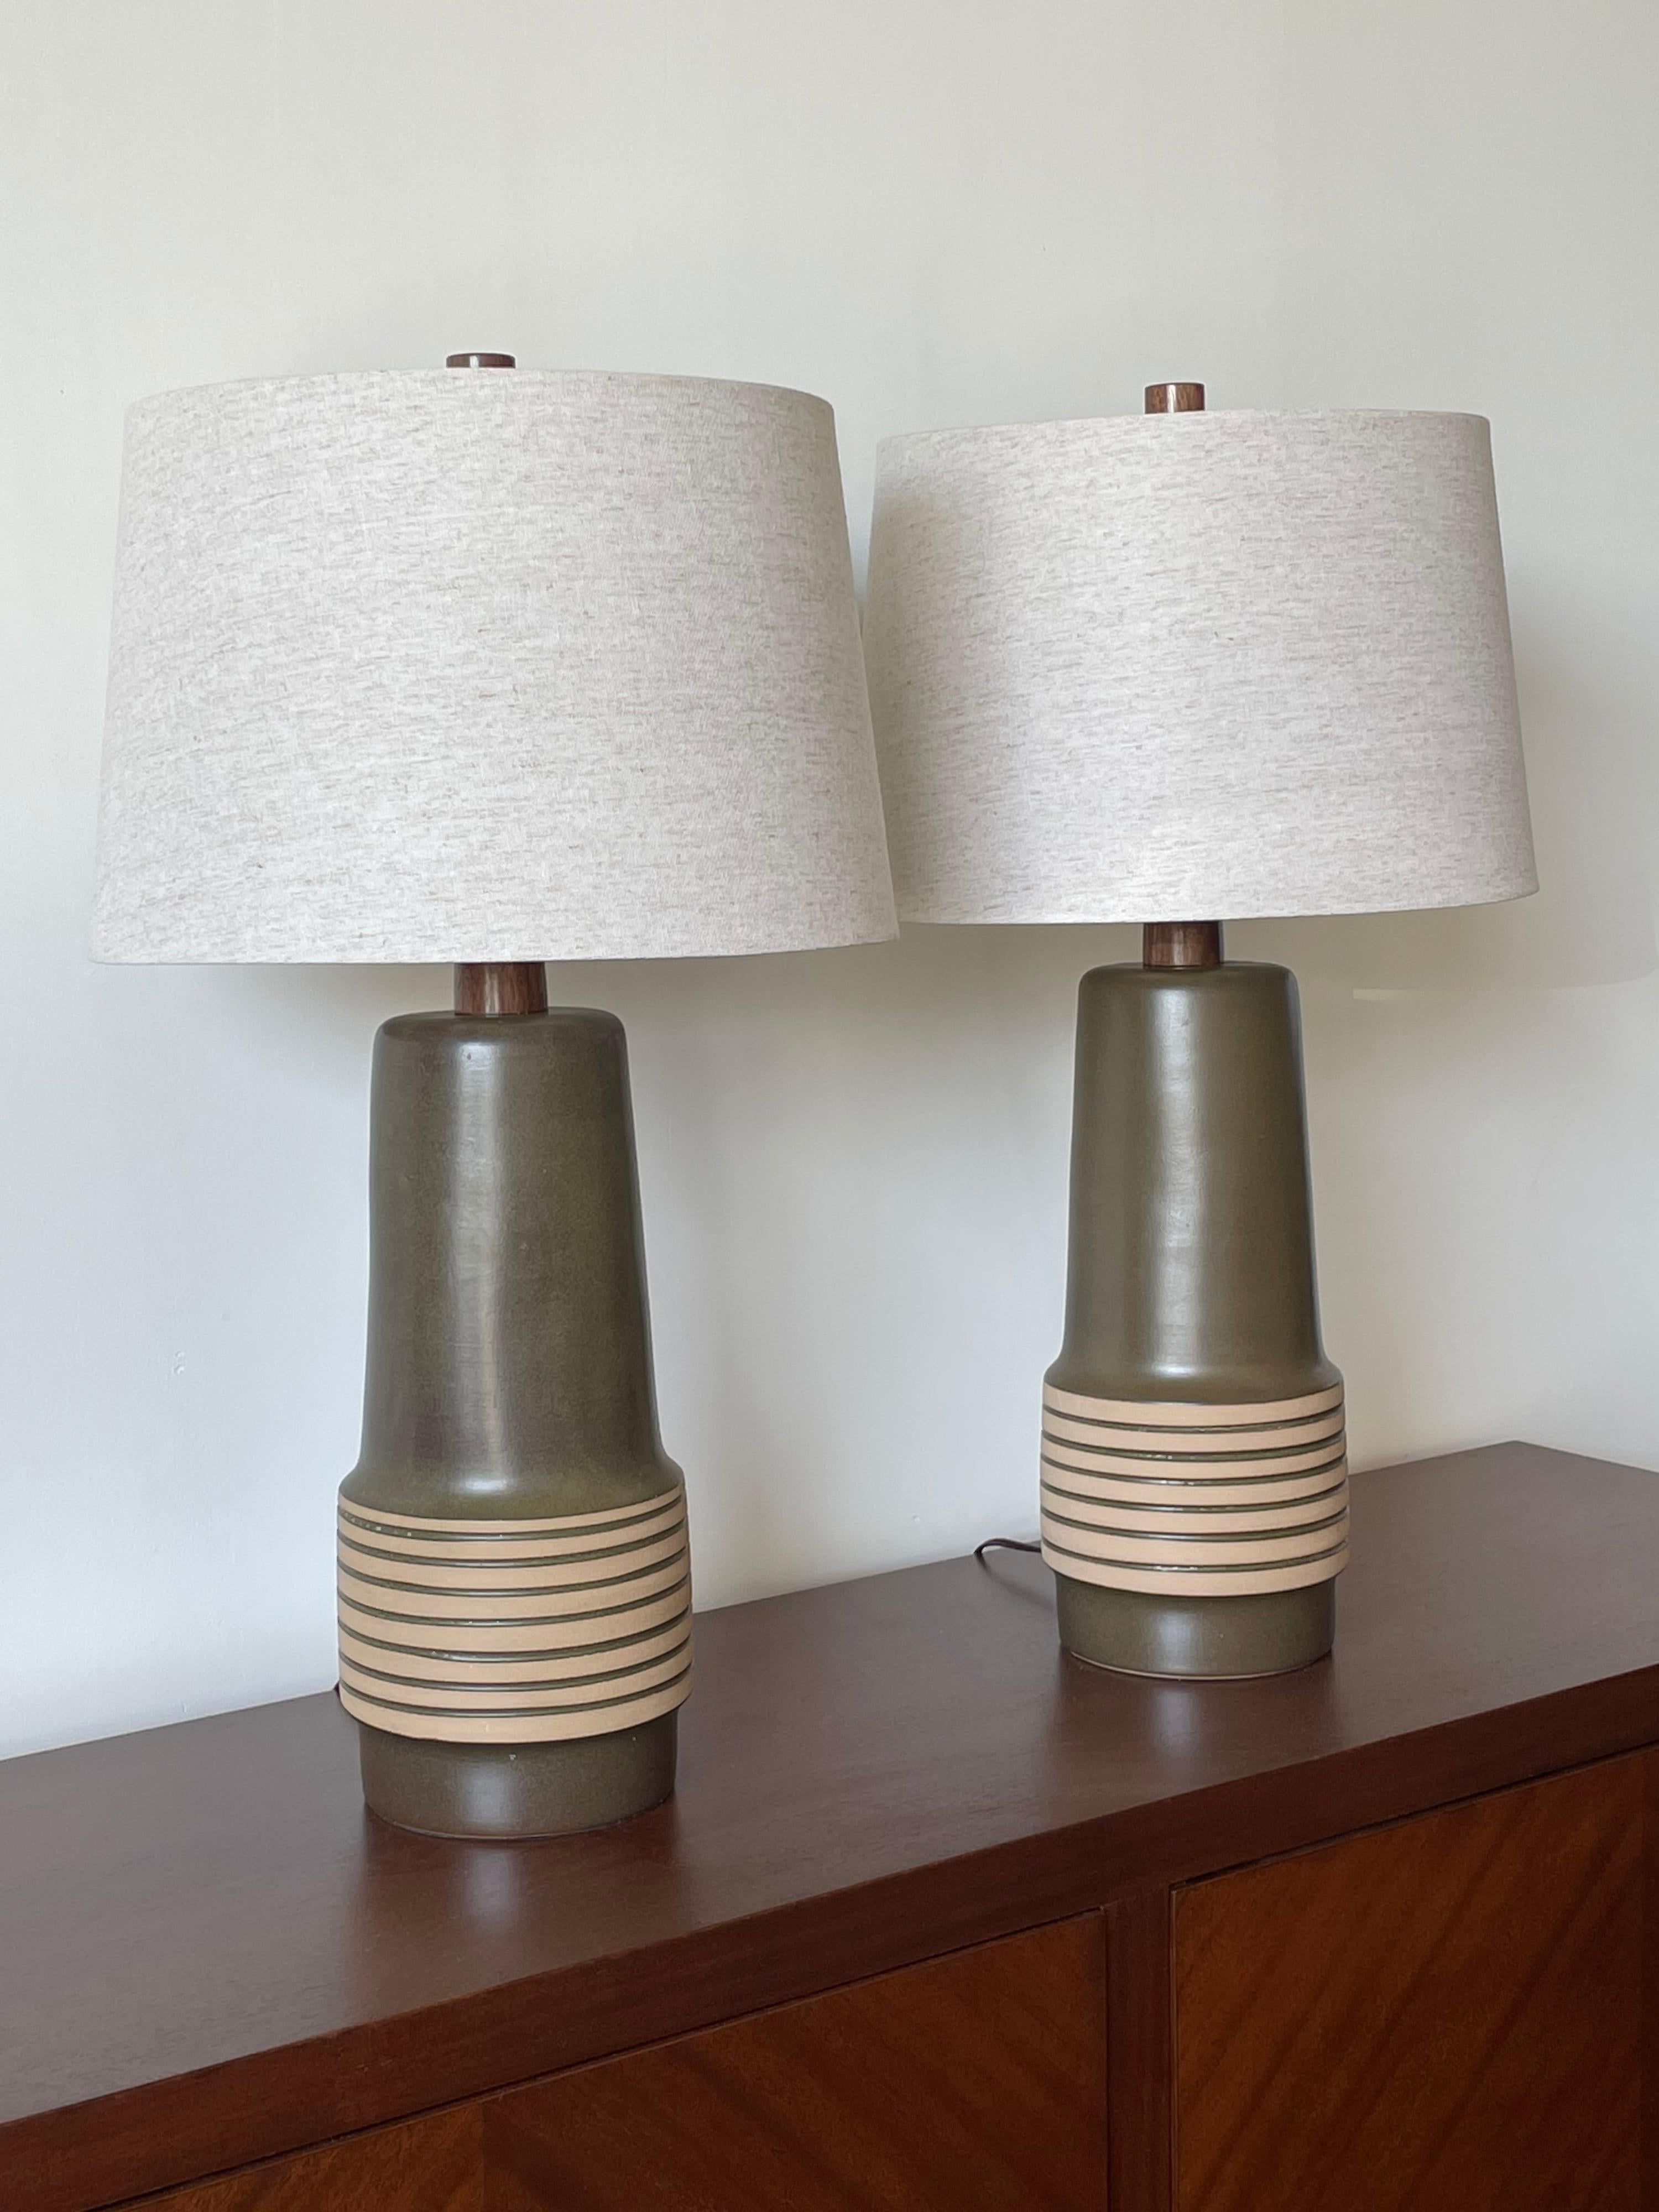 A wonderful pair of large ceramic lamps by ceramicist duo Jane and Gordon Martz for Marshall Studios. A predominately dark green color with slight hues of a plum underneath. These lamps were sourced as “new old stock” ceramic lamp bases. They are